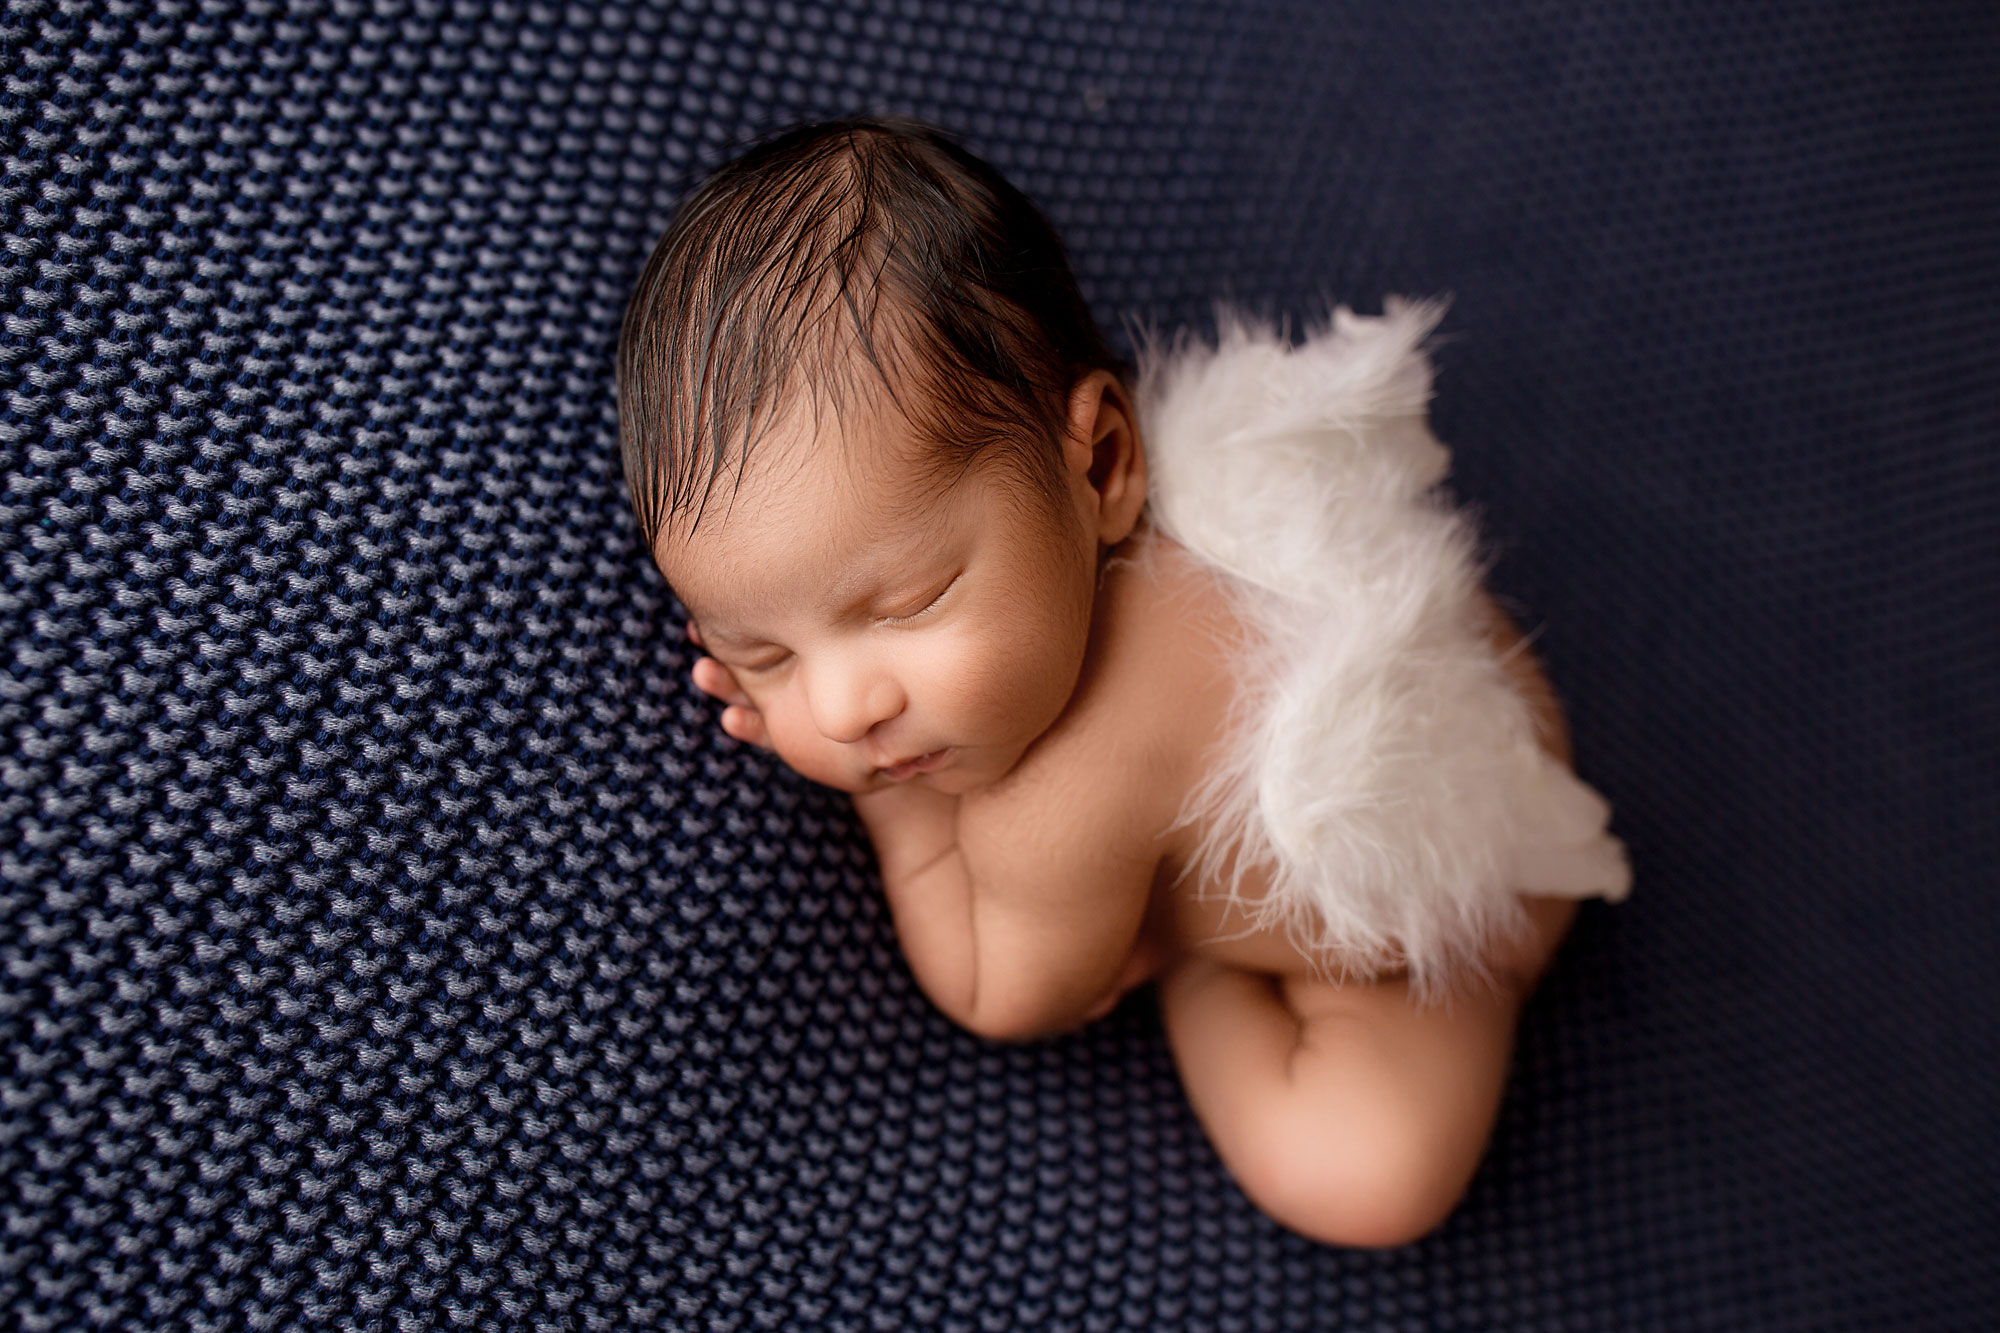 Somerset county NJ newborn photo session baby with angel wings